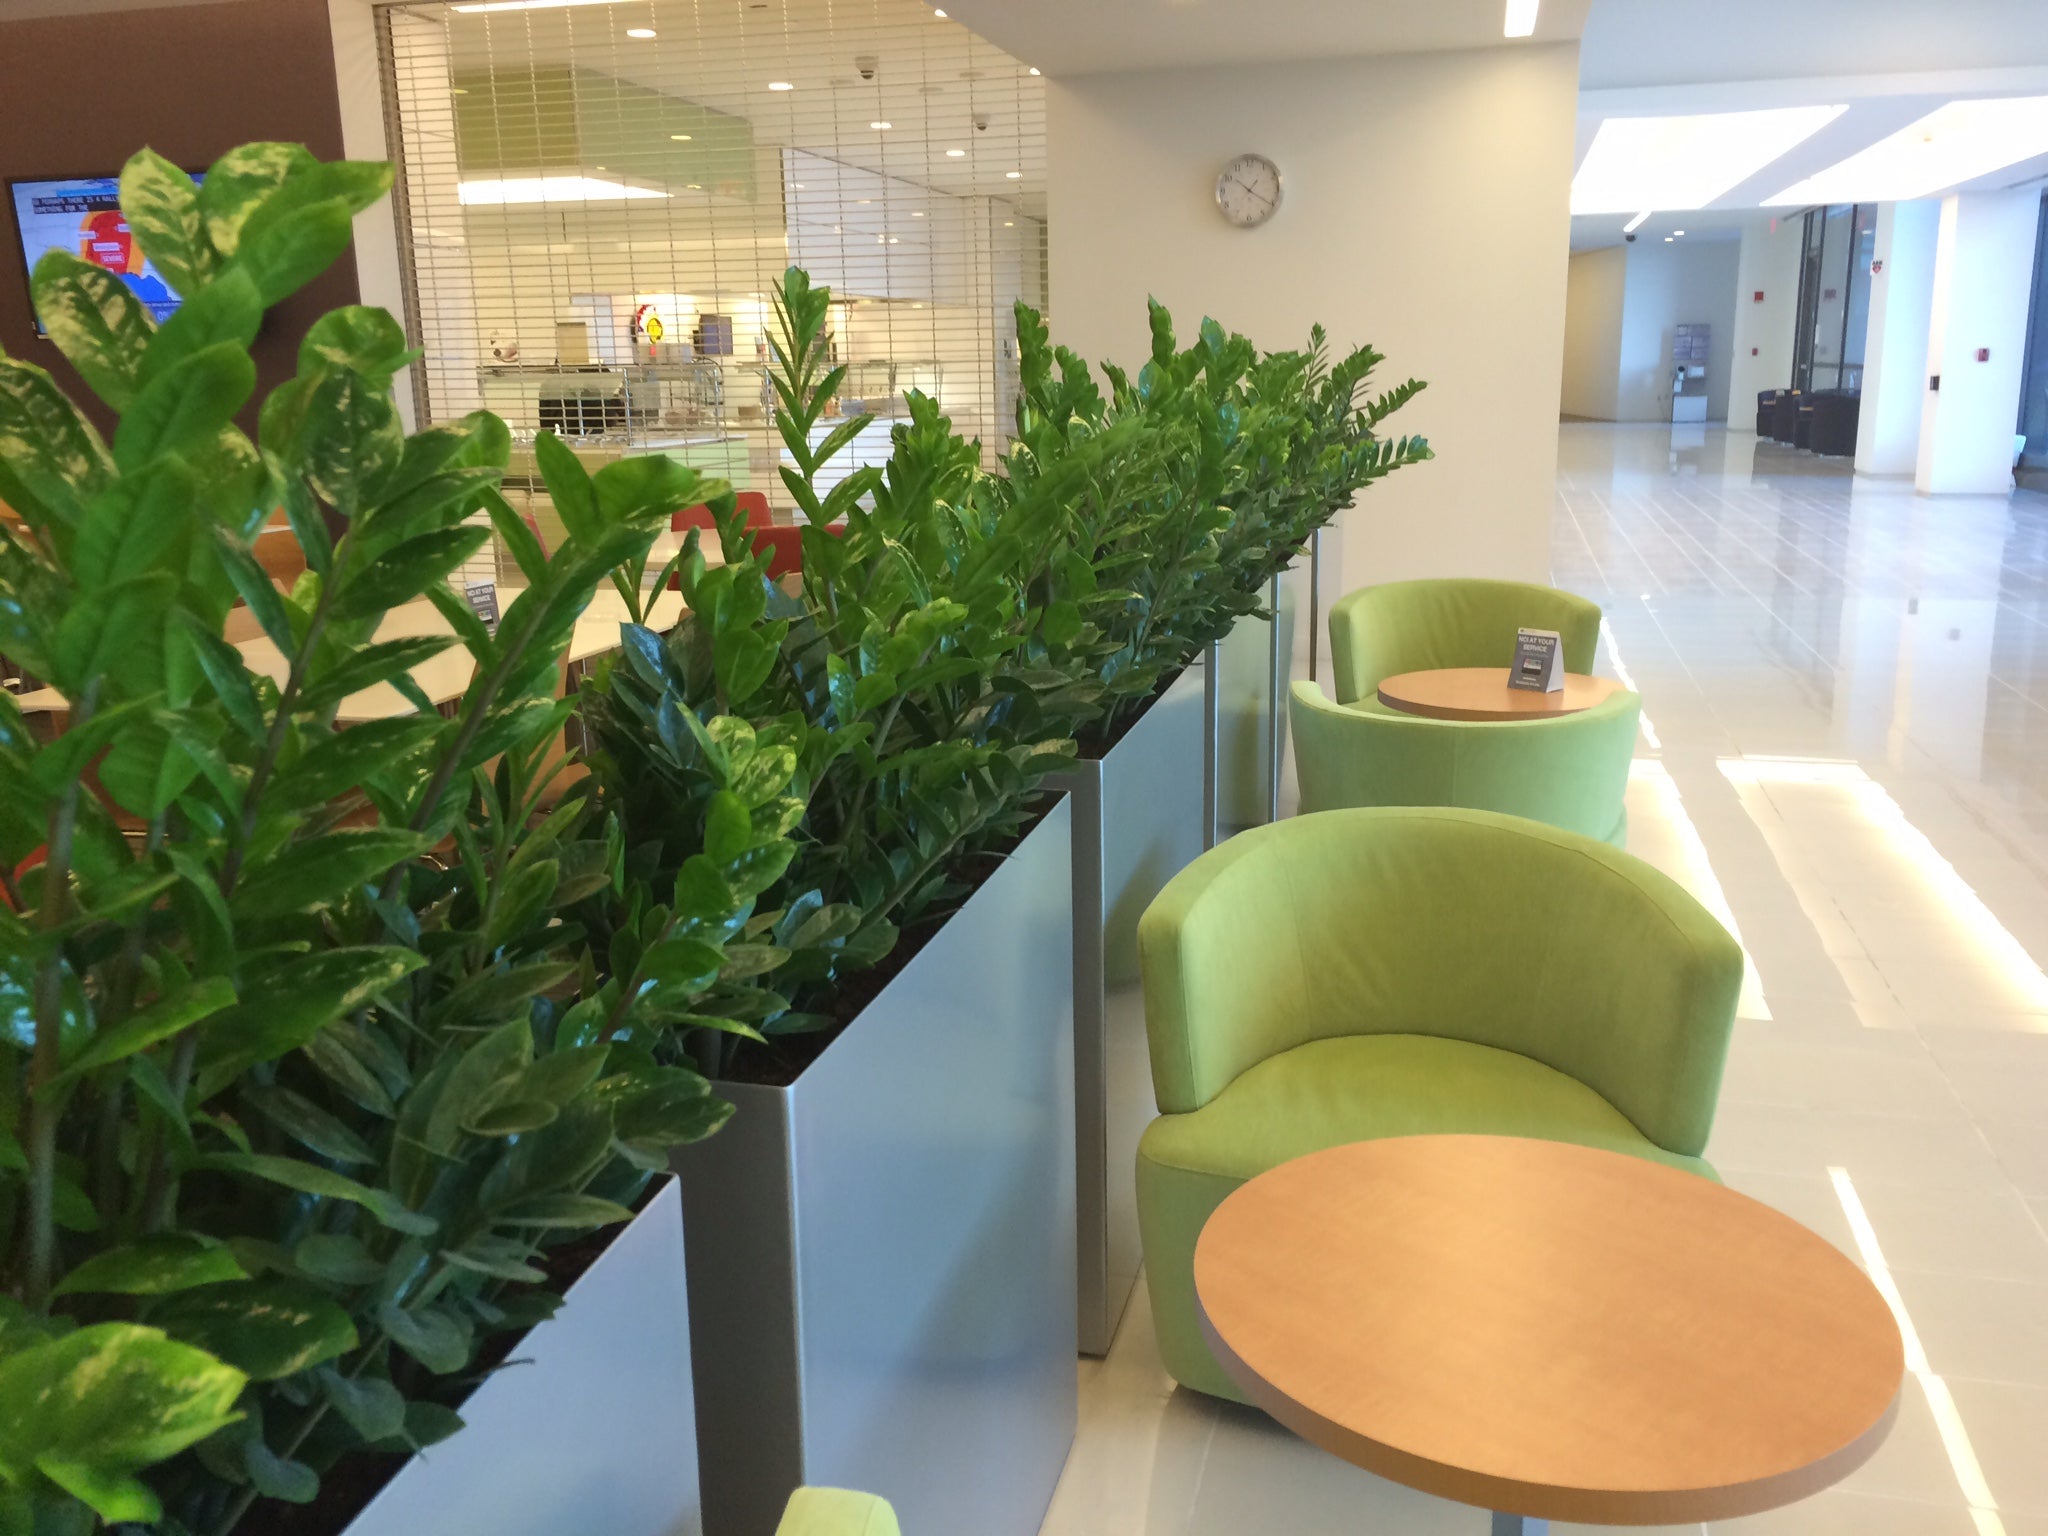 Commercial divider planters